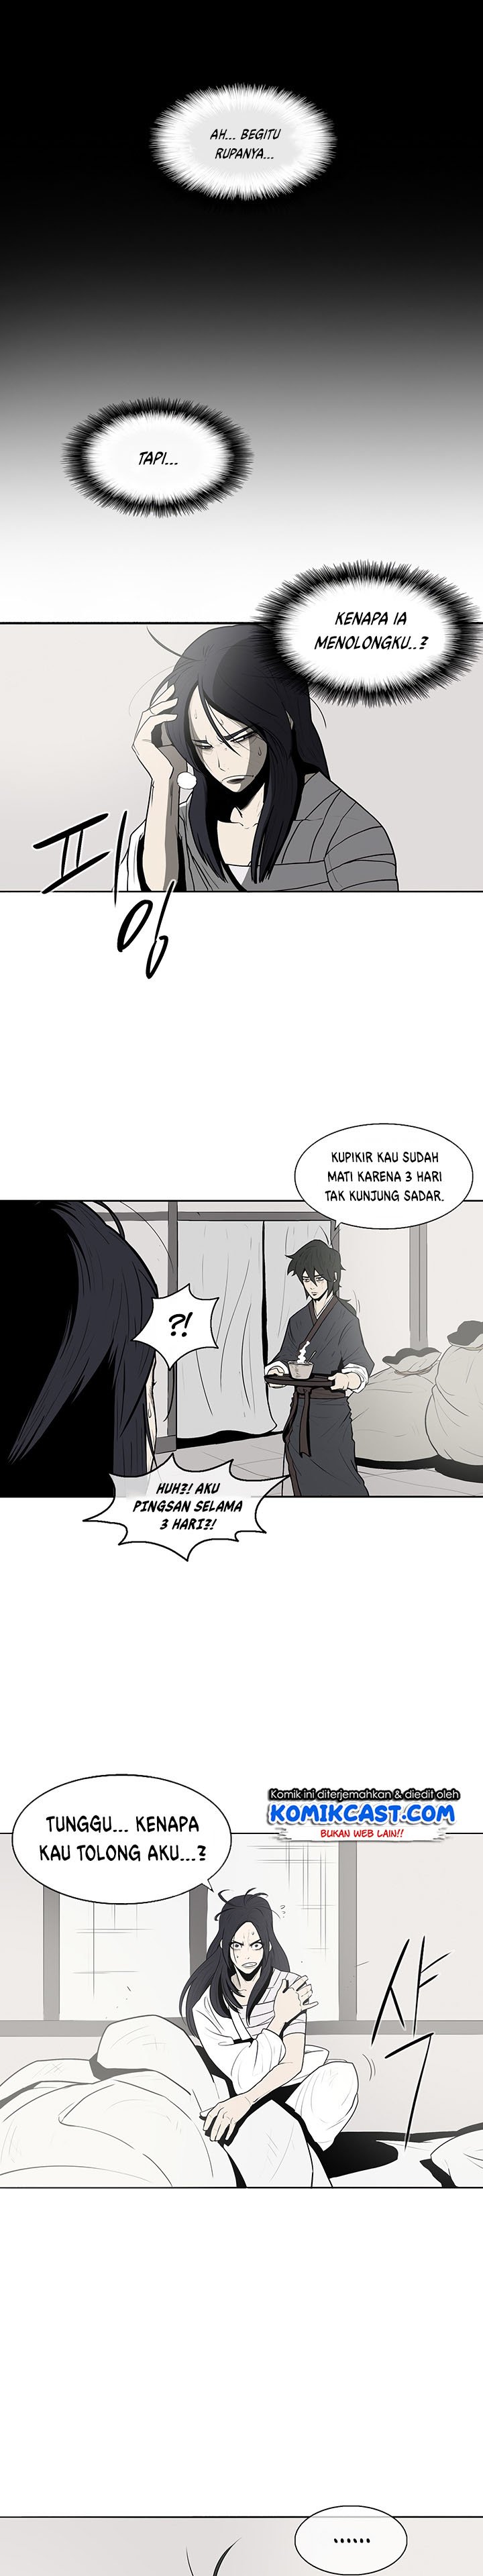 Legend of the Northern Blade Chapter 4